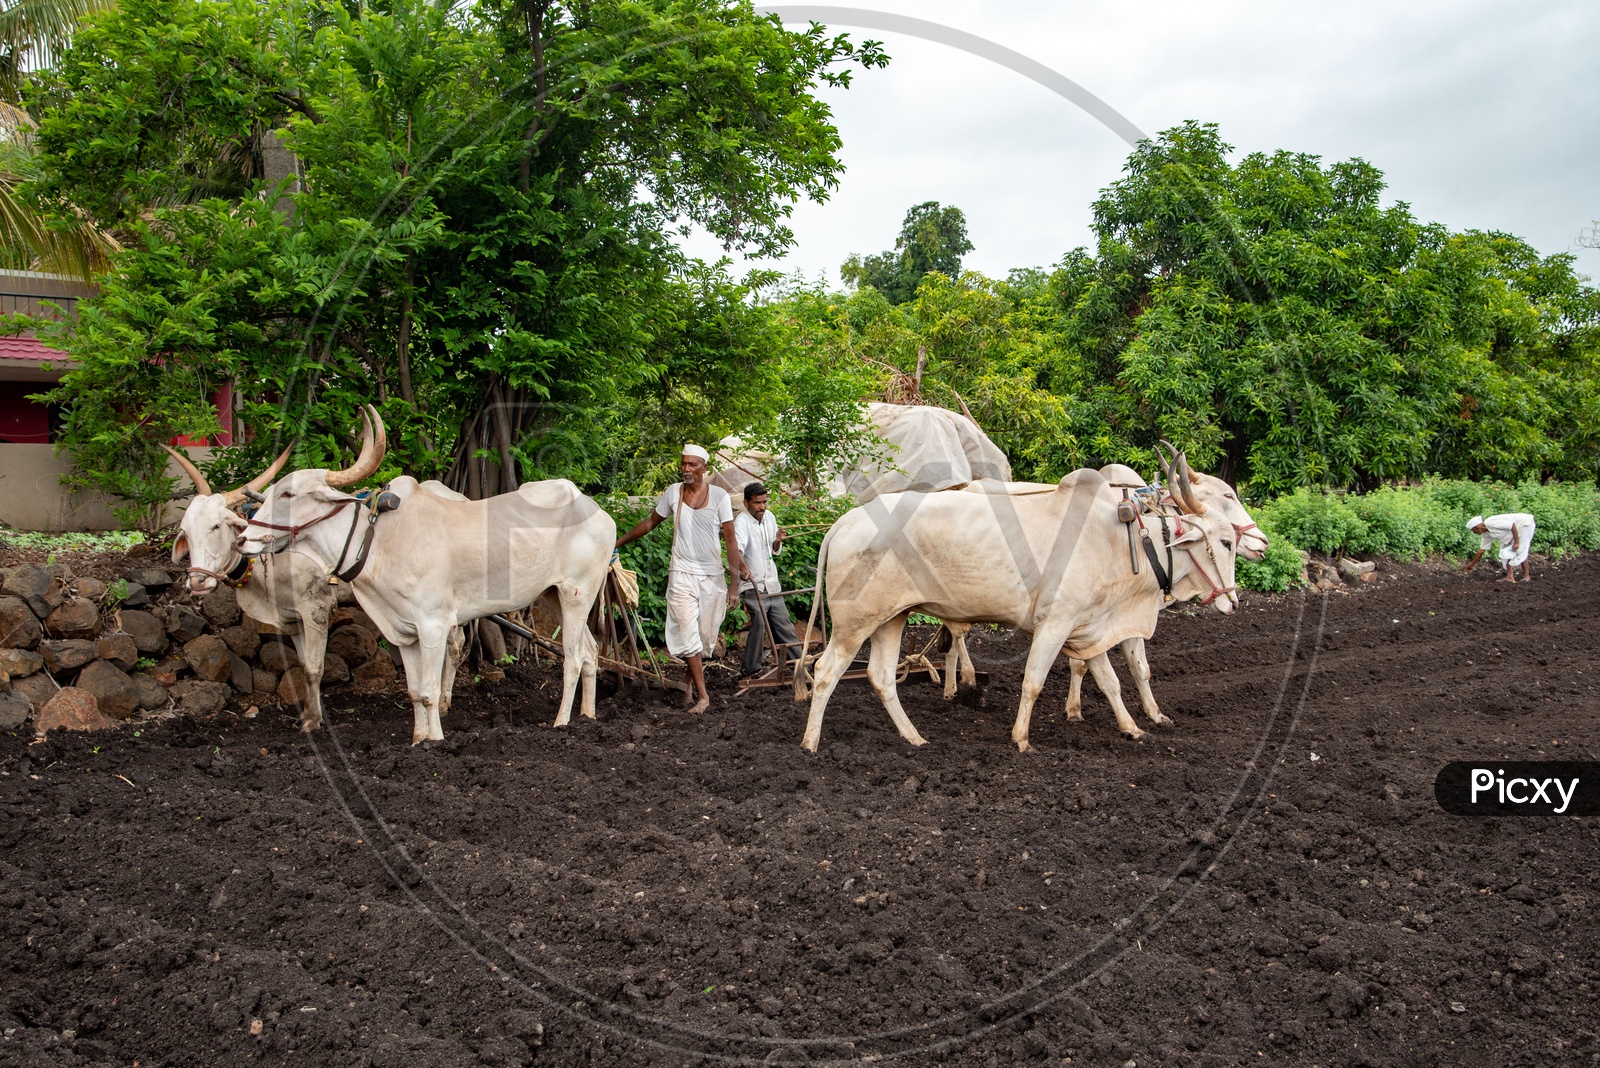 Ploughing fields with cattle in a village in Maharashtra